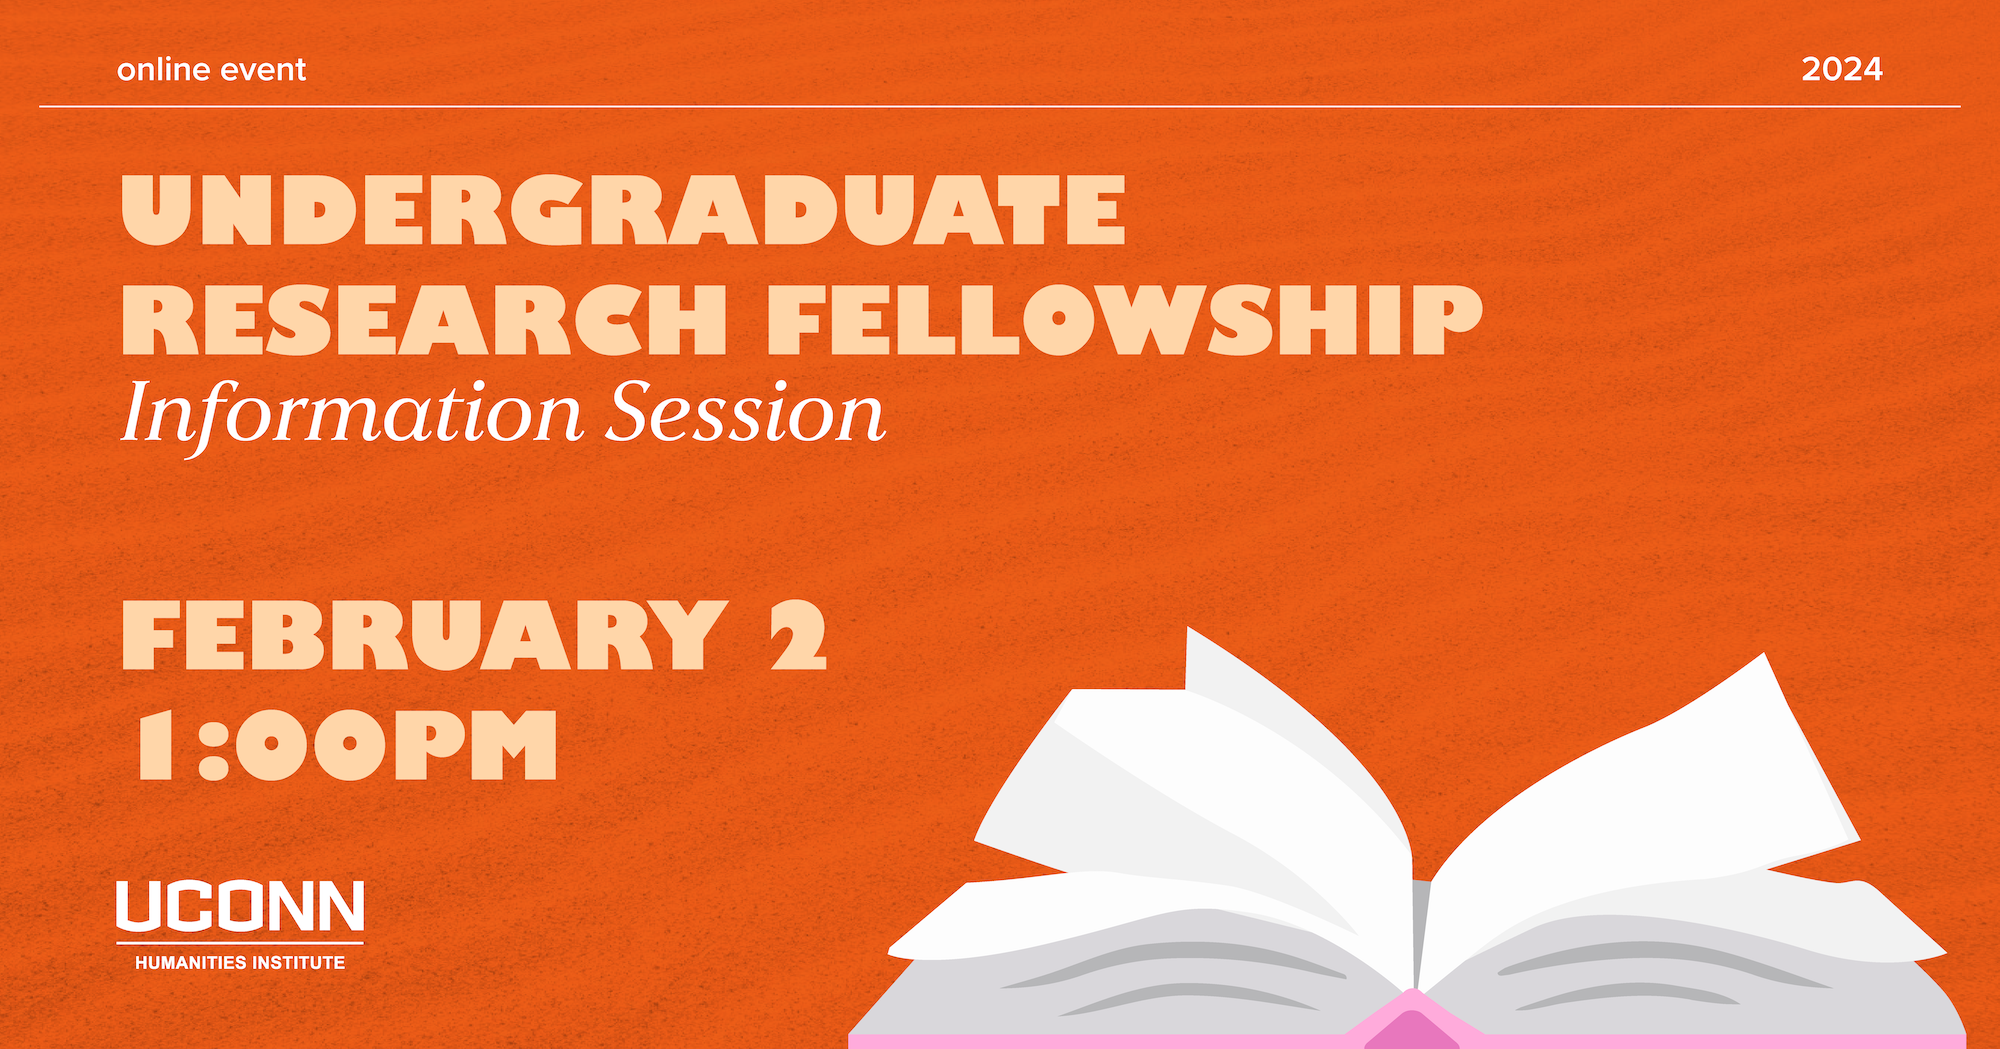 Undergraduate Research Fellowship Information Session. Online Event. February 2, 1:00pm.